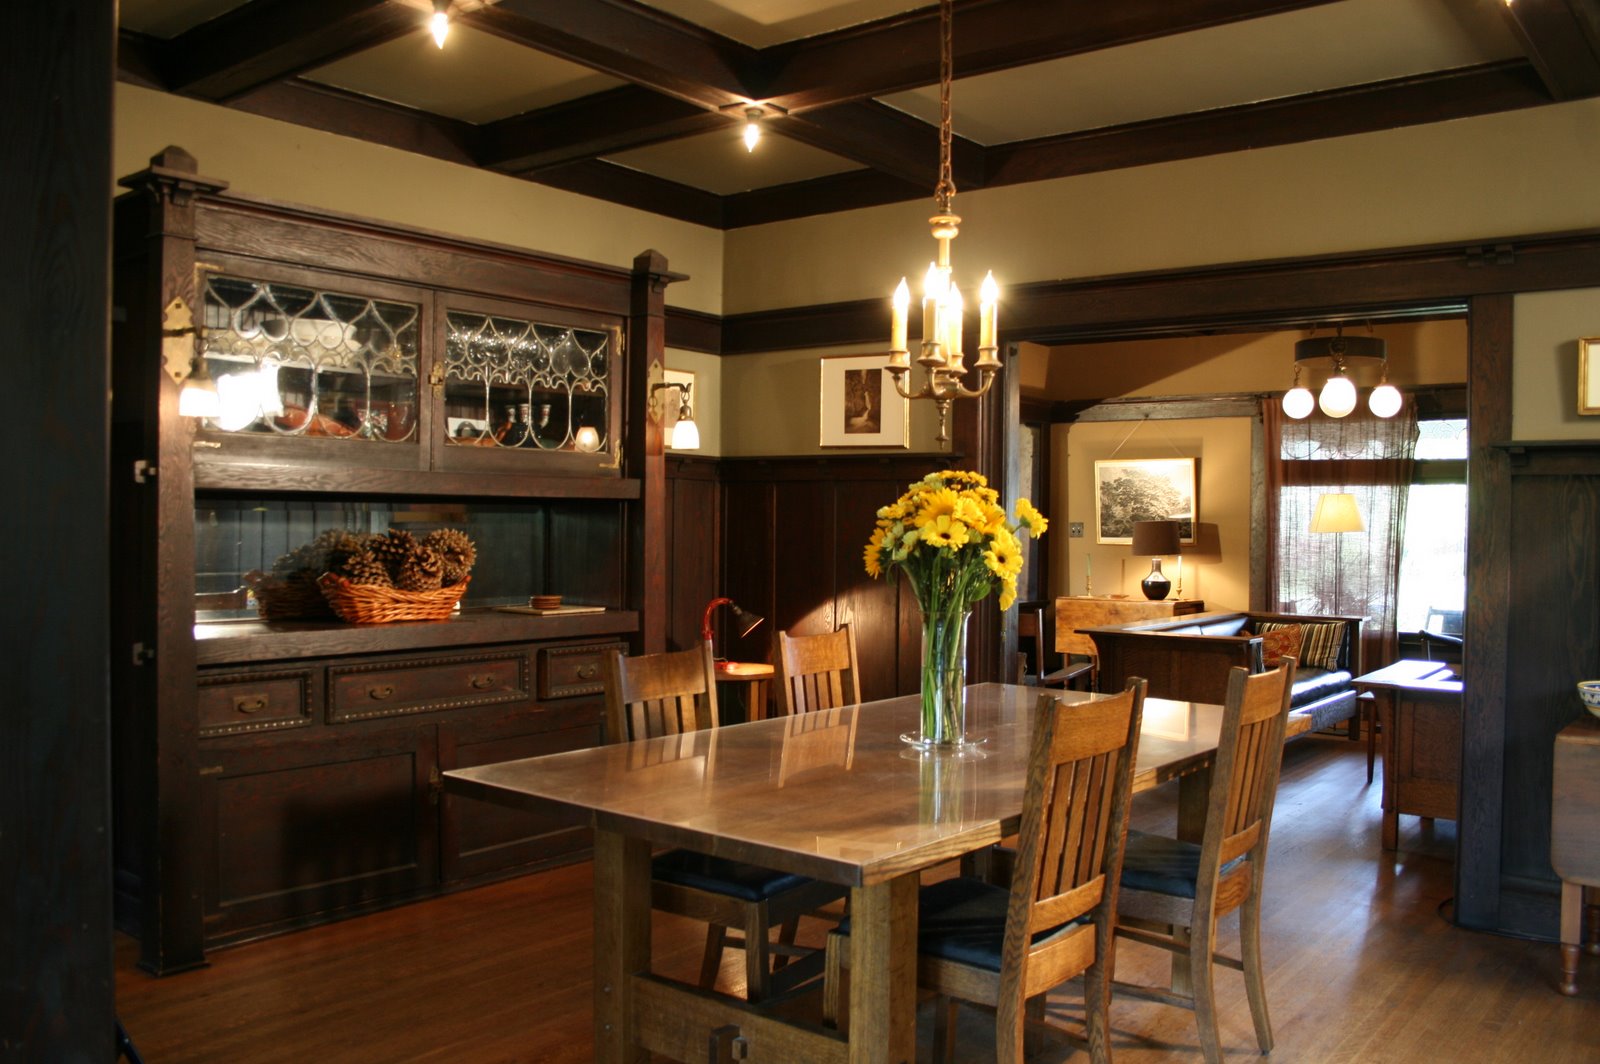 Home Priority: Astonishing Craftsman Style Interior Design Ideas for